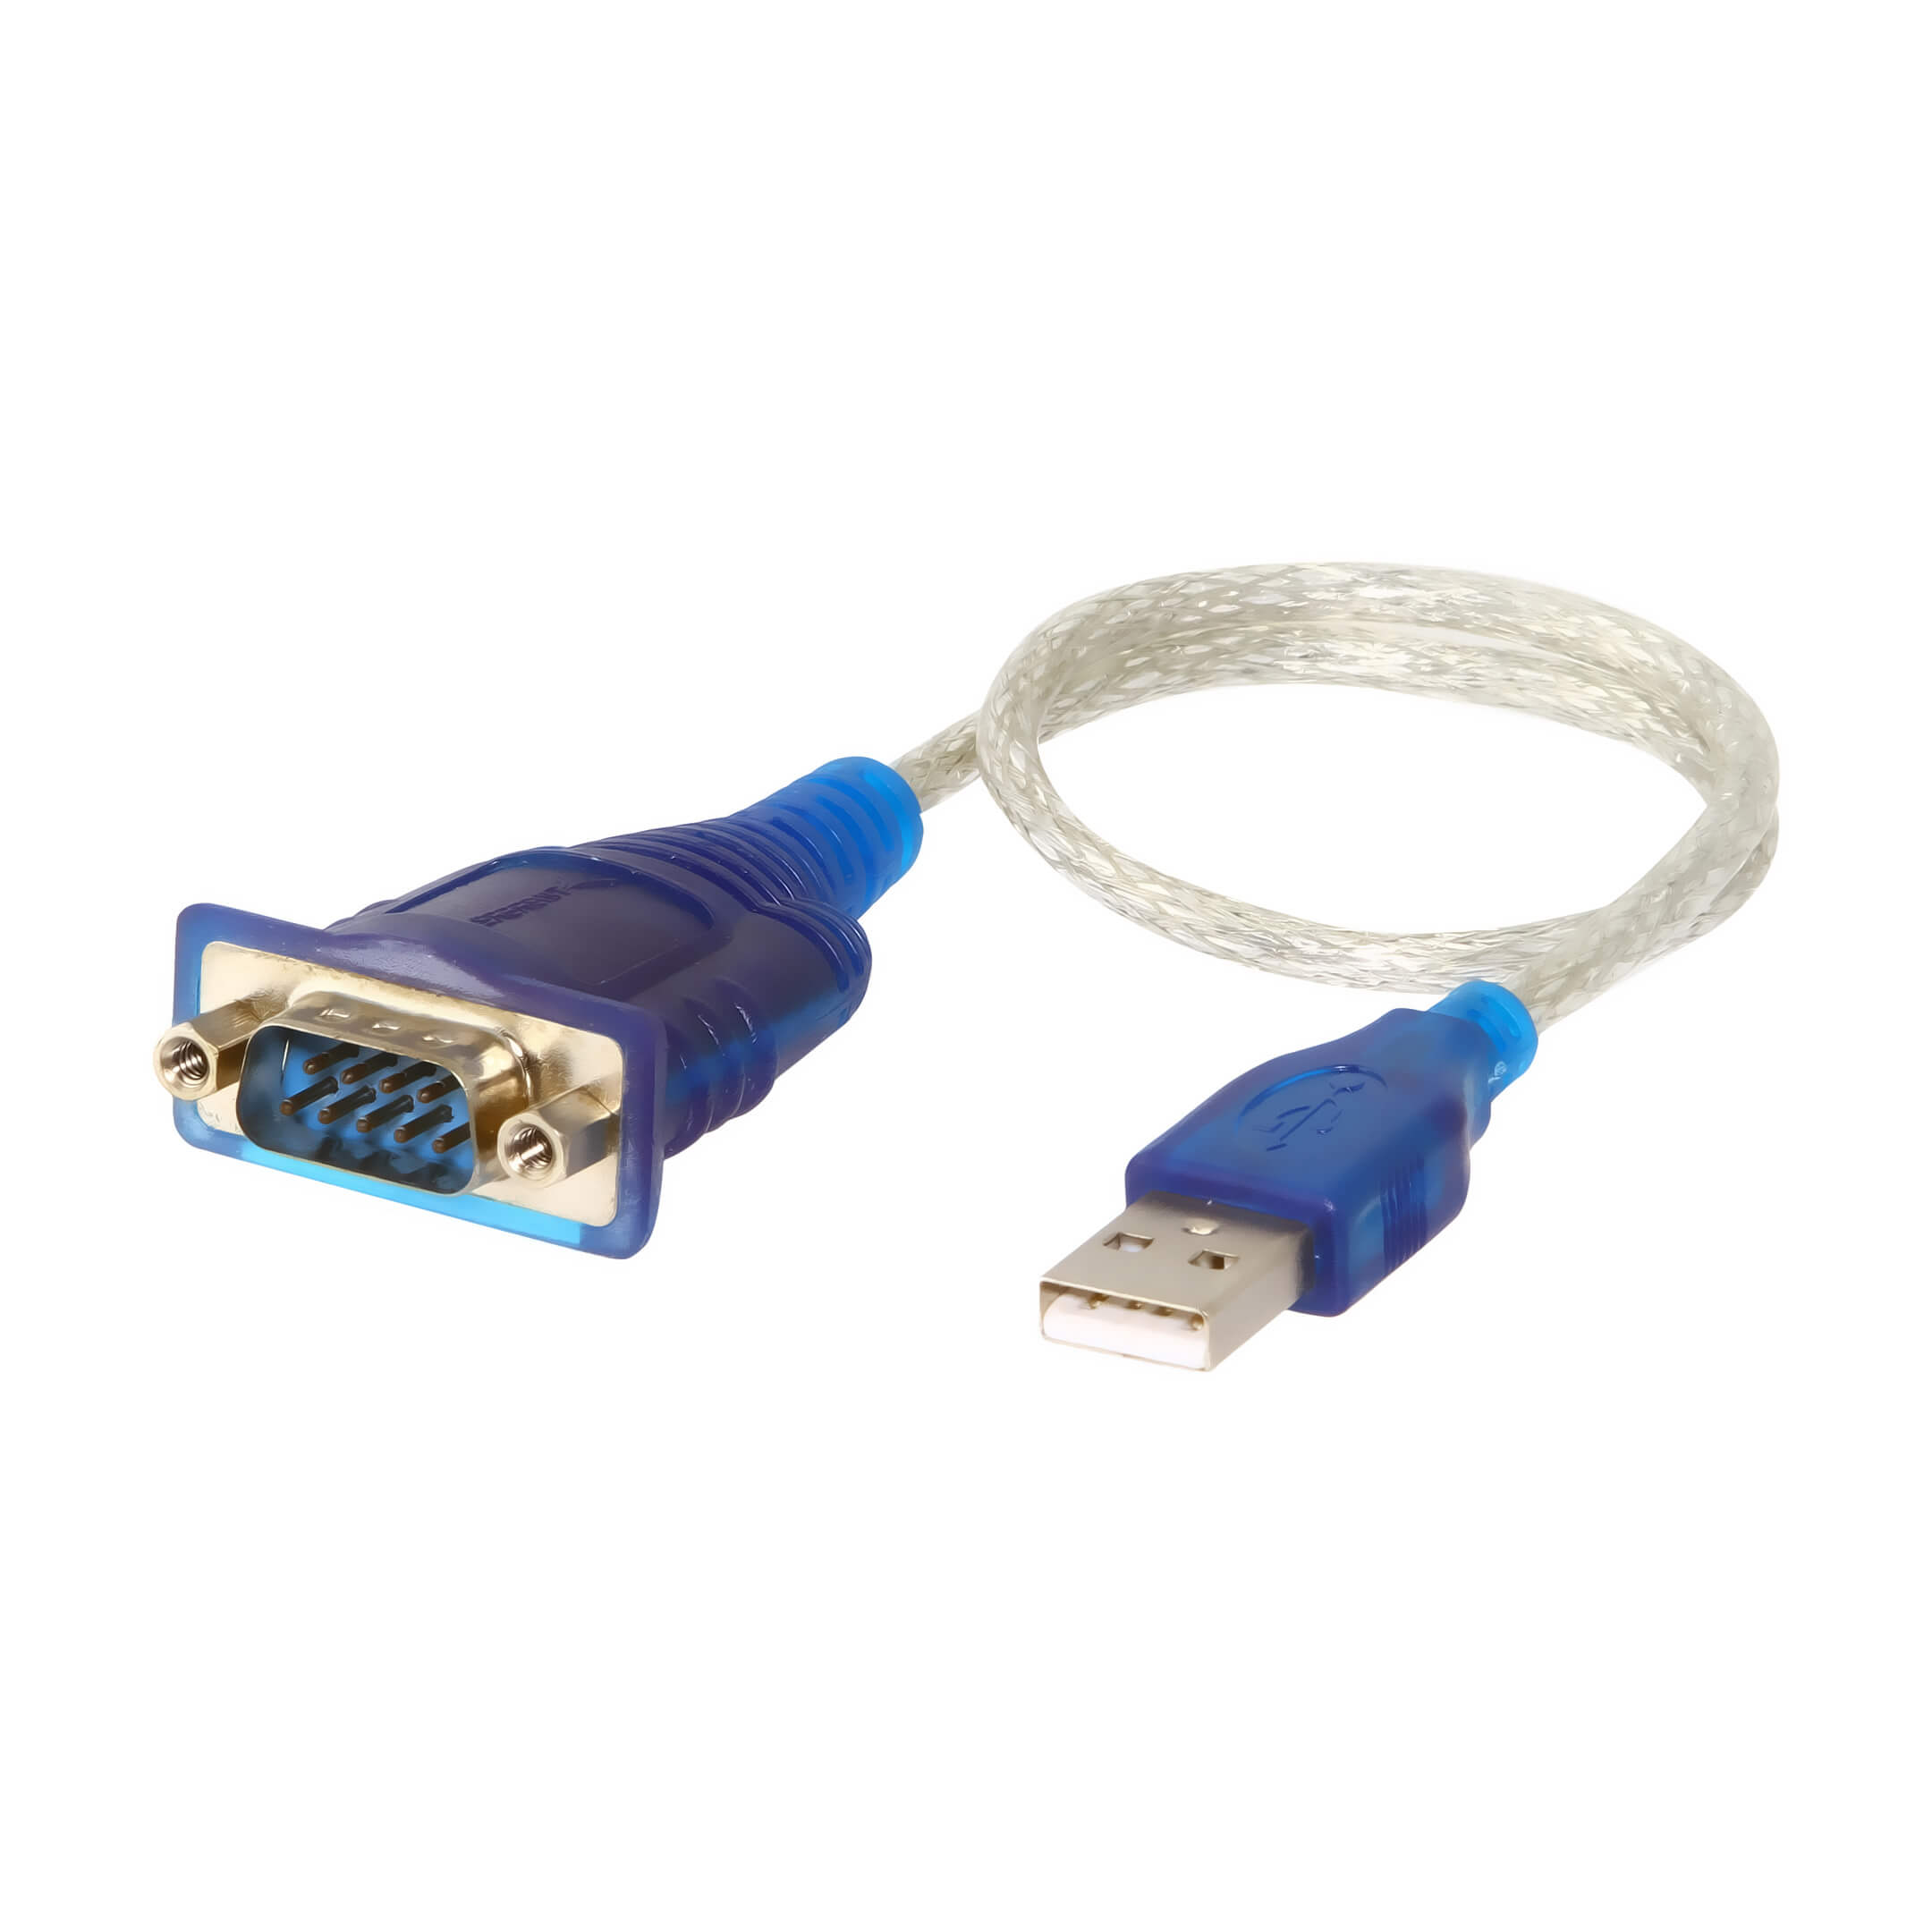 <!--04-->USB to Serial Adapter